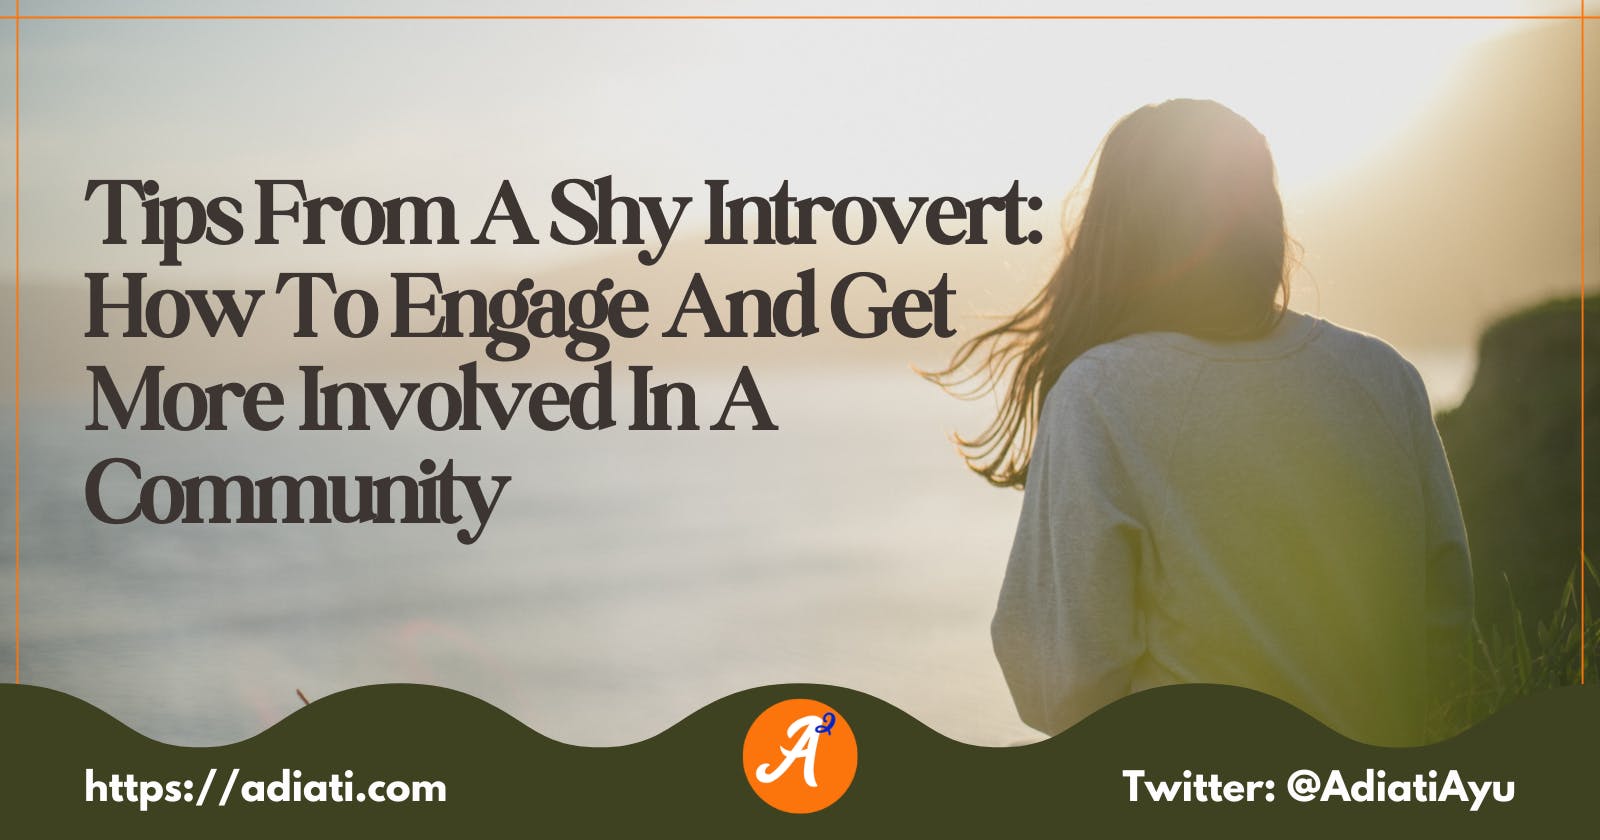 Tips From A Shy Introvert: How To Engage And Get More Involved In A Community